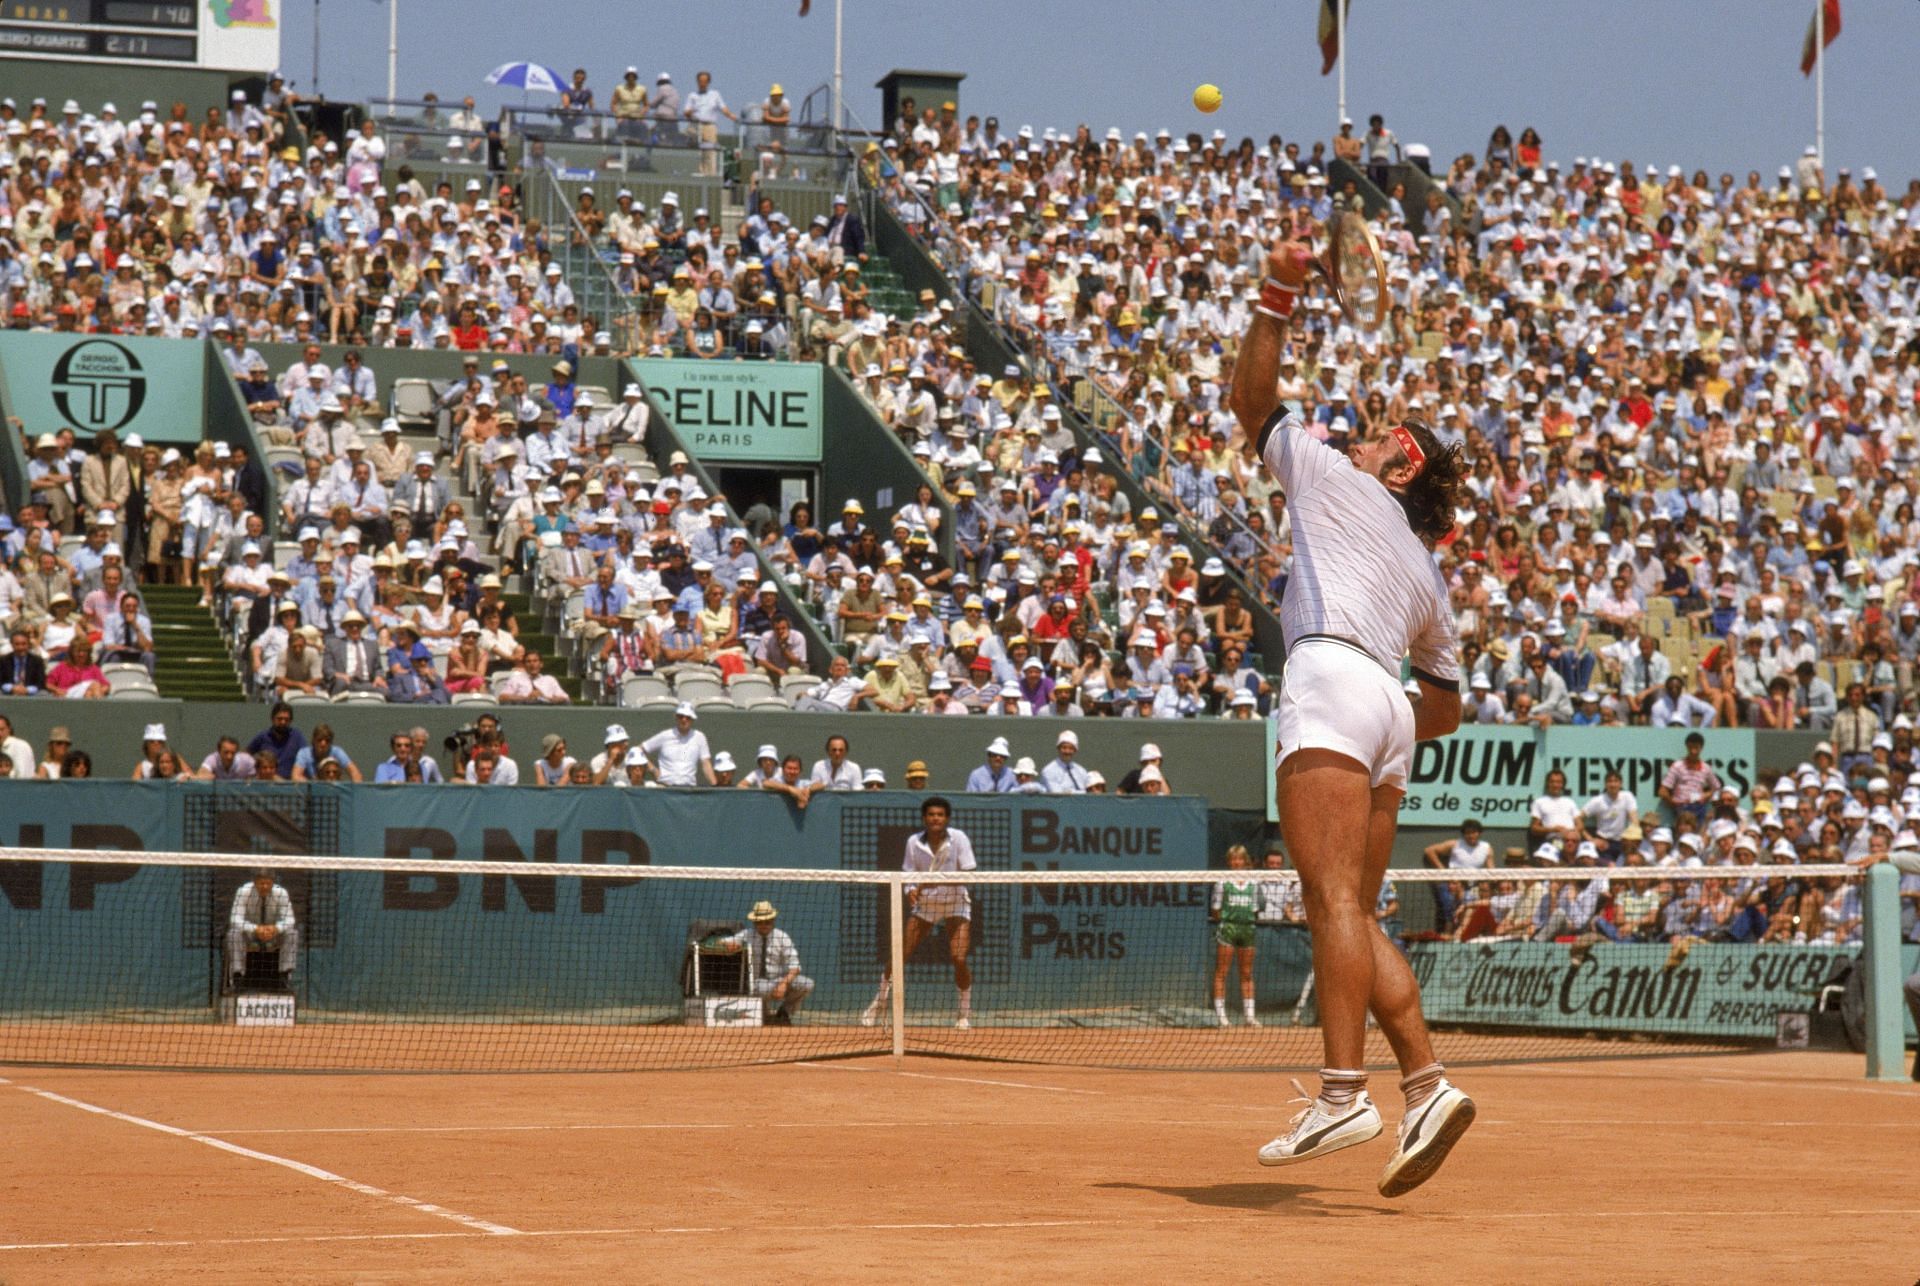 Guillermo Vilas serves at the 1977 French Open